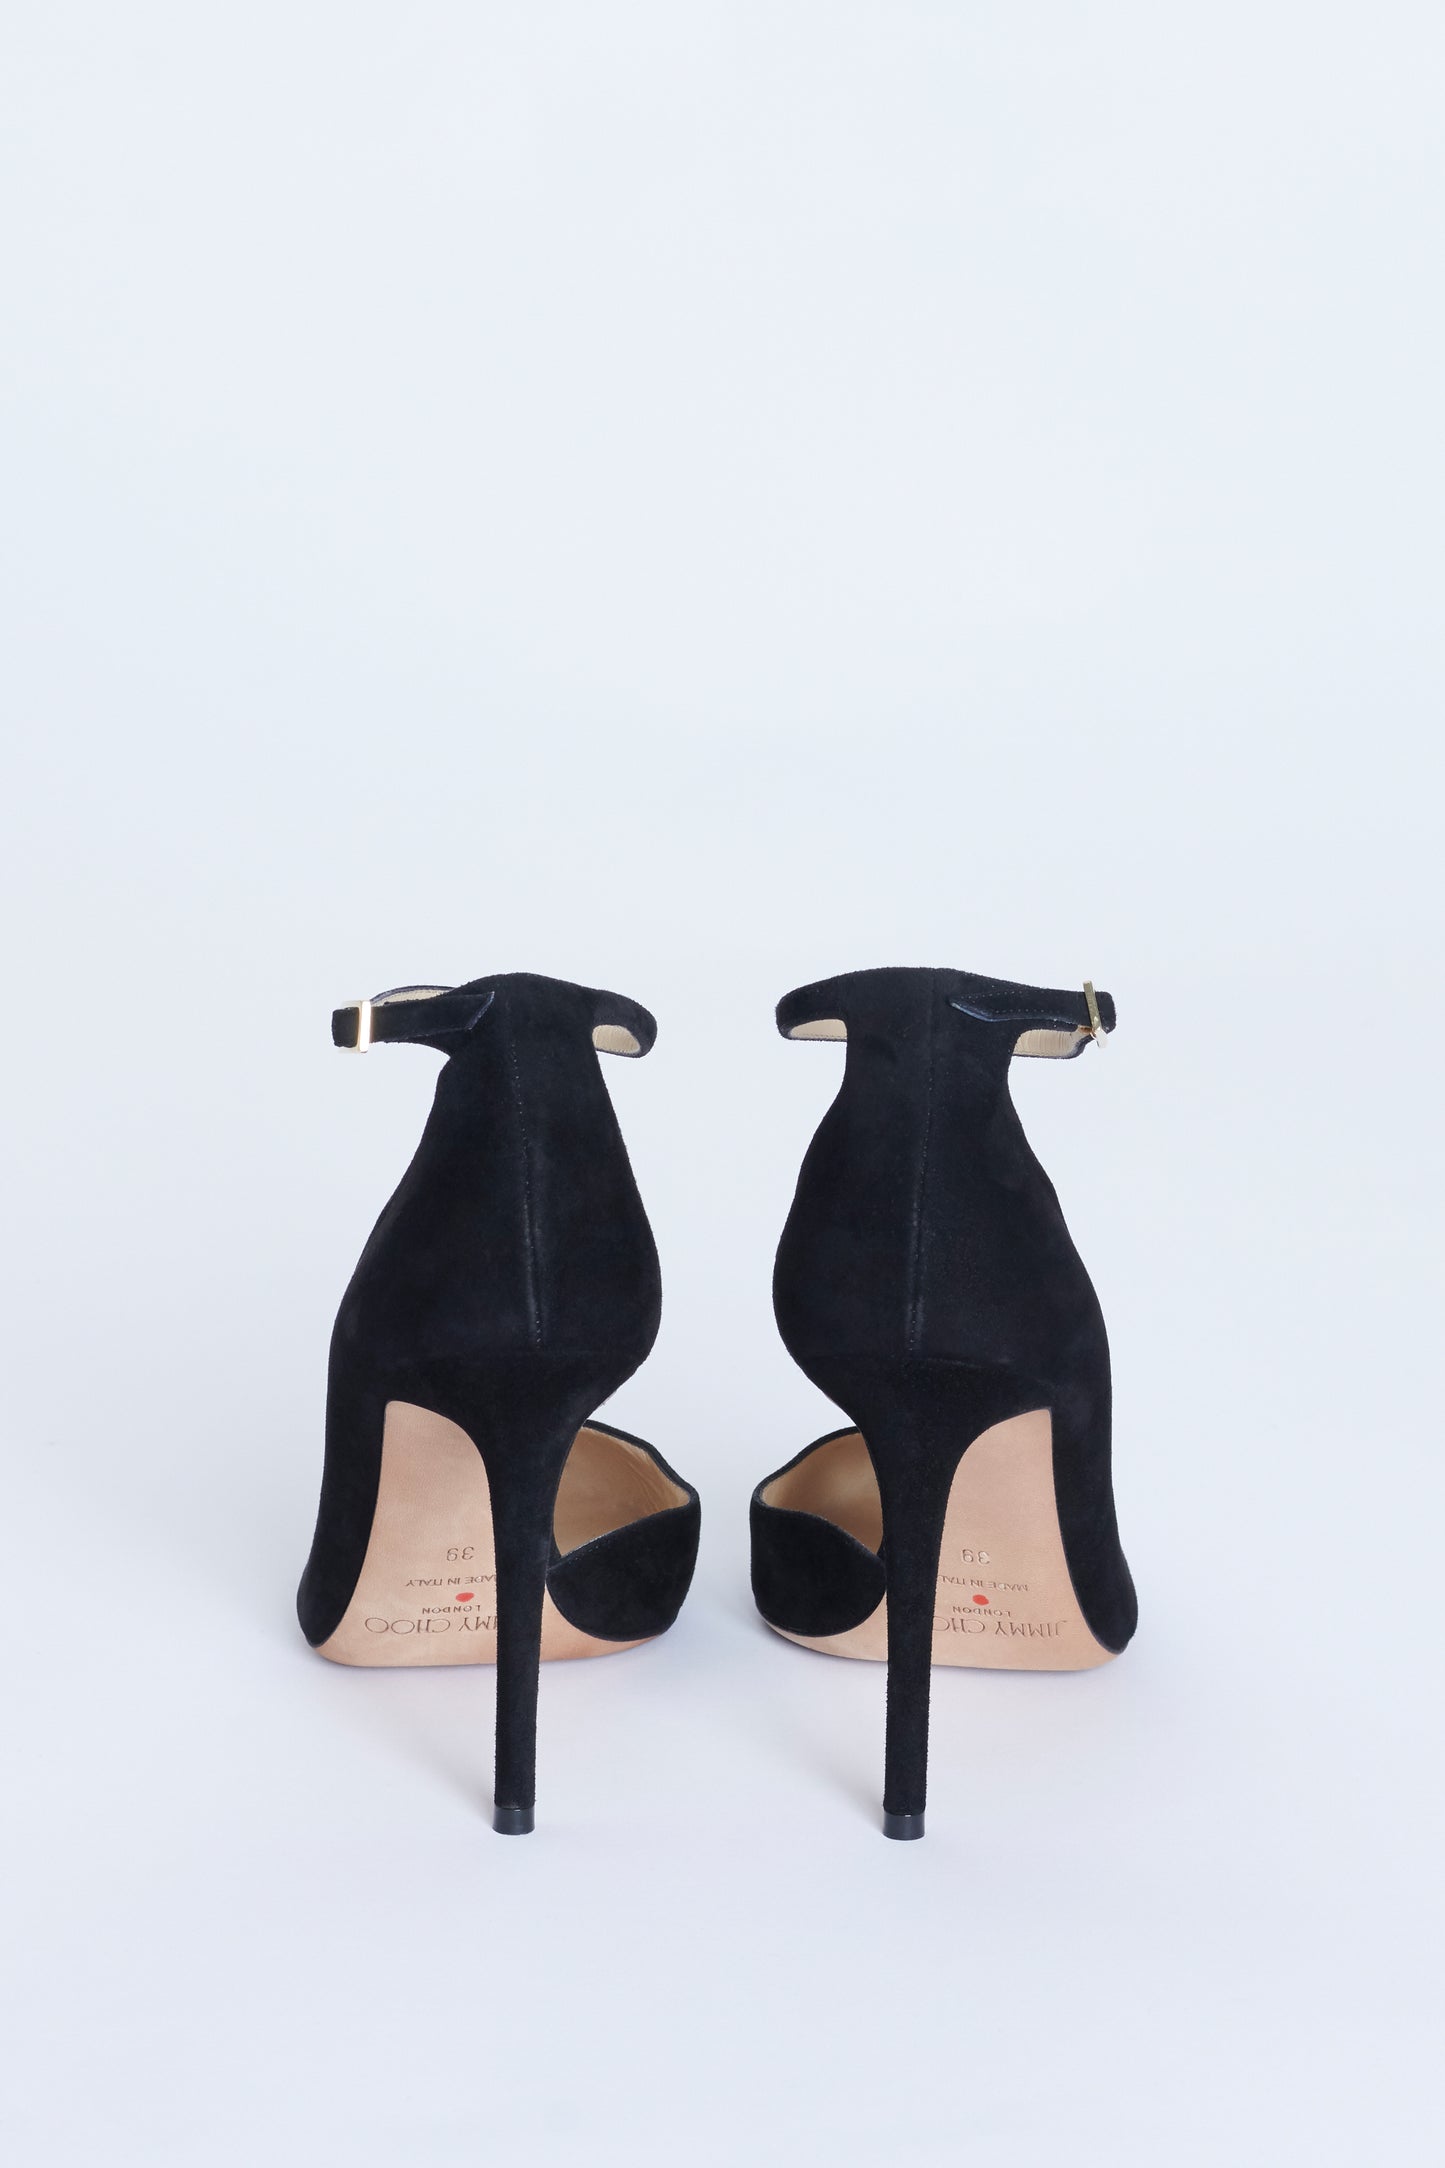 Black Suede Lucy 100 Pointed Toe Preowned Pumps